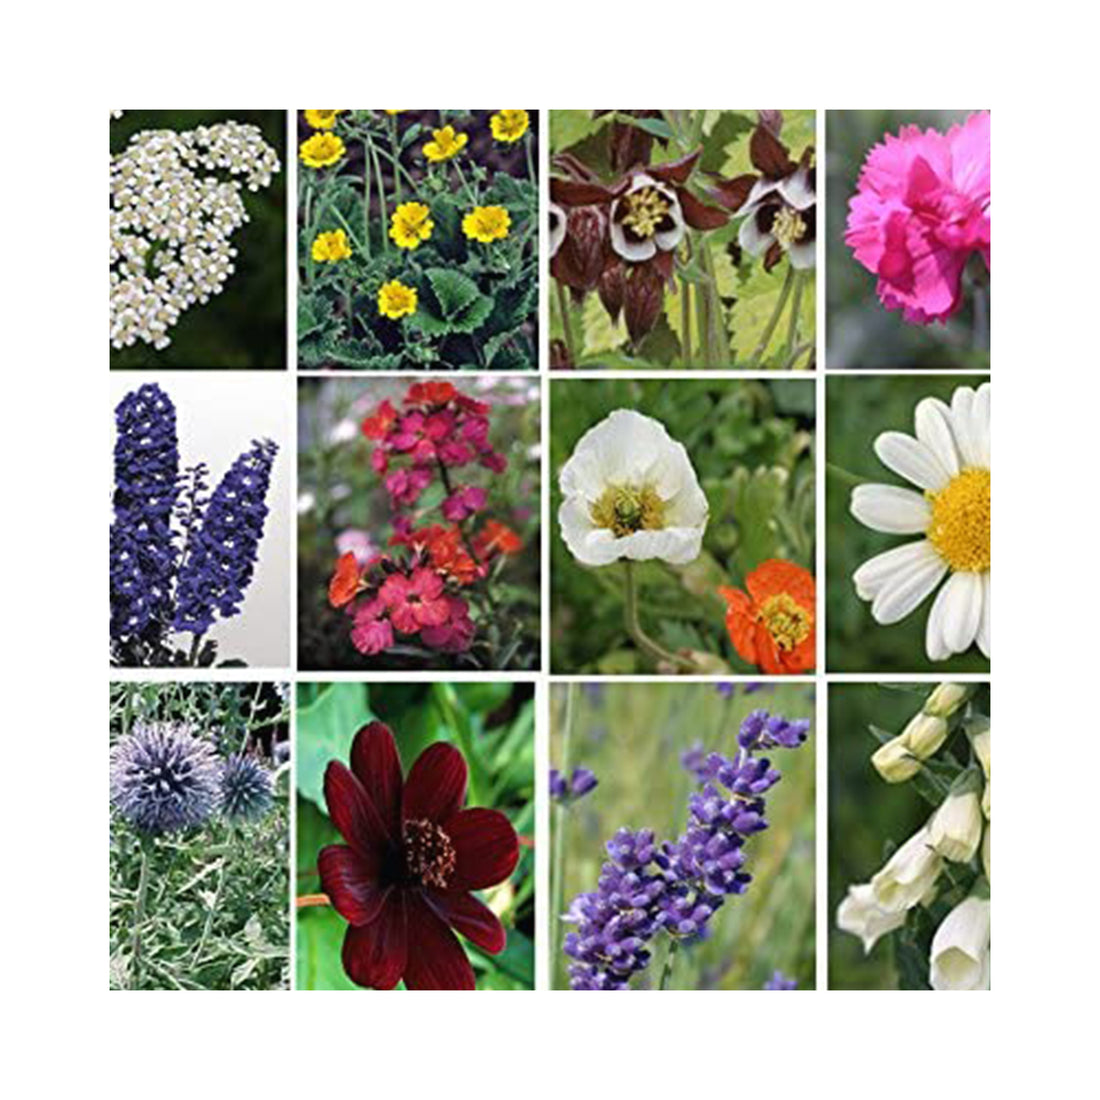 Hardy Herbaceous Perennial Cottage Garden Plants, 10 Mixed starter plants